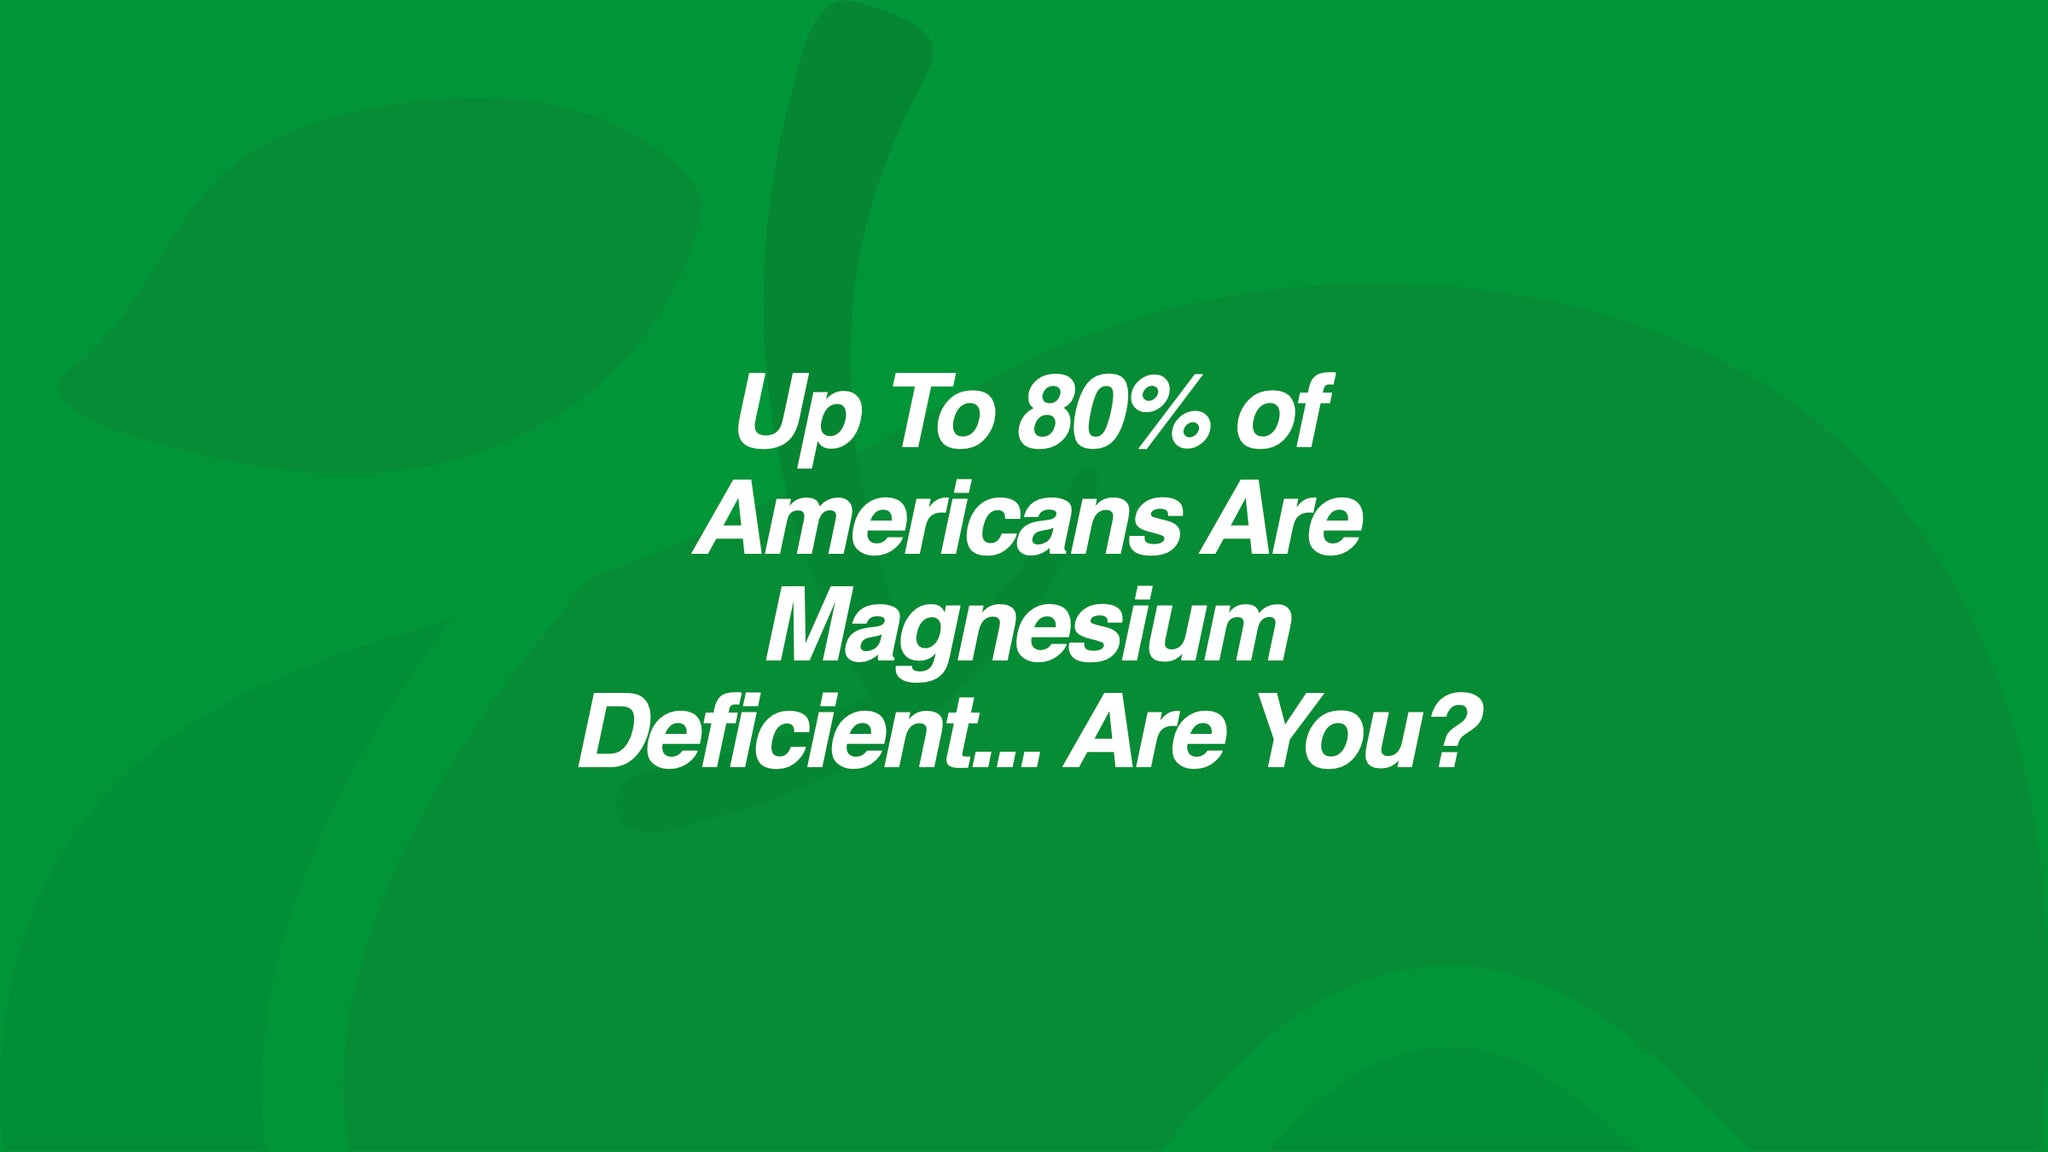 Up To 80% of Americans Are Magnesium Deficient... Are You?